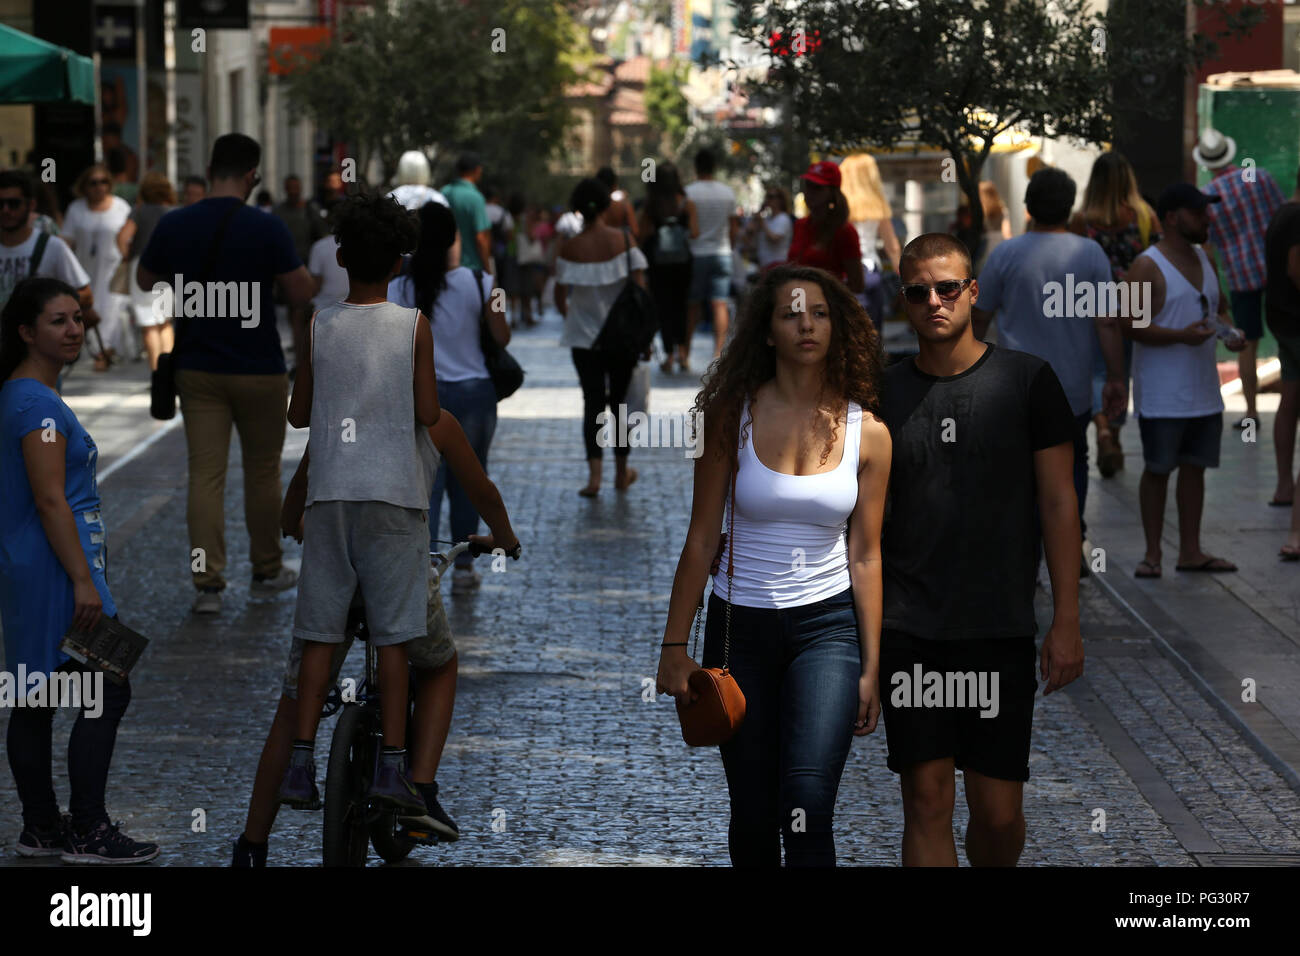 Athens, Greece. 22nd Aug, 2018. People walk on a commercial street of Athens, Greece, on Aug. 22, 2018. Greek retailing welcomed Monday's milestone of Greece's exit from the international rescue financing programs with mixed feelings of optimism and concern for the future. TO GO WITH Feature: Greek retailing welcomes end of bailouts with optimism, concern for future Credit: Marios Lolos/Xinhua/Alamy Live News Stock Photo